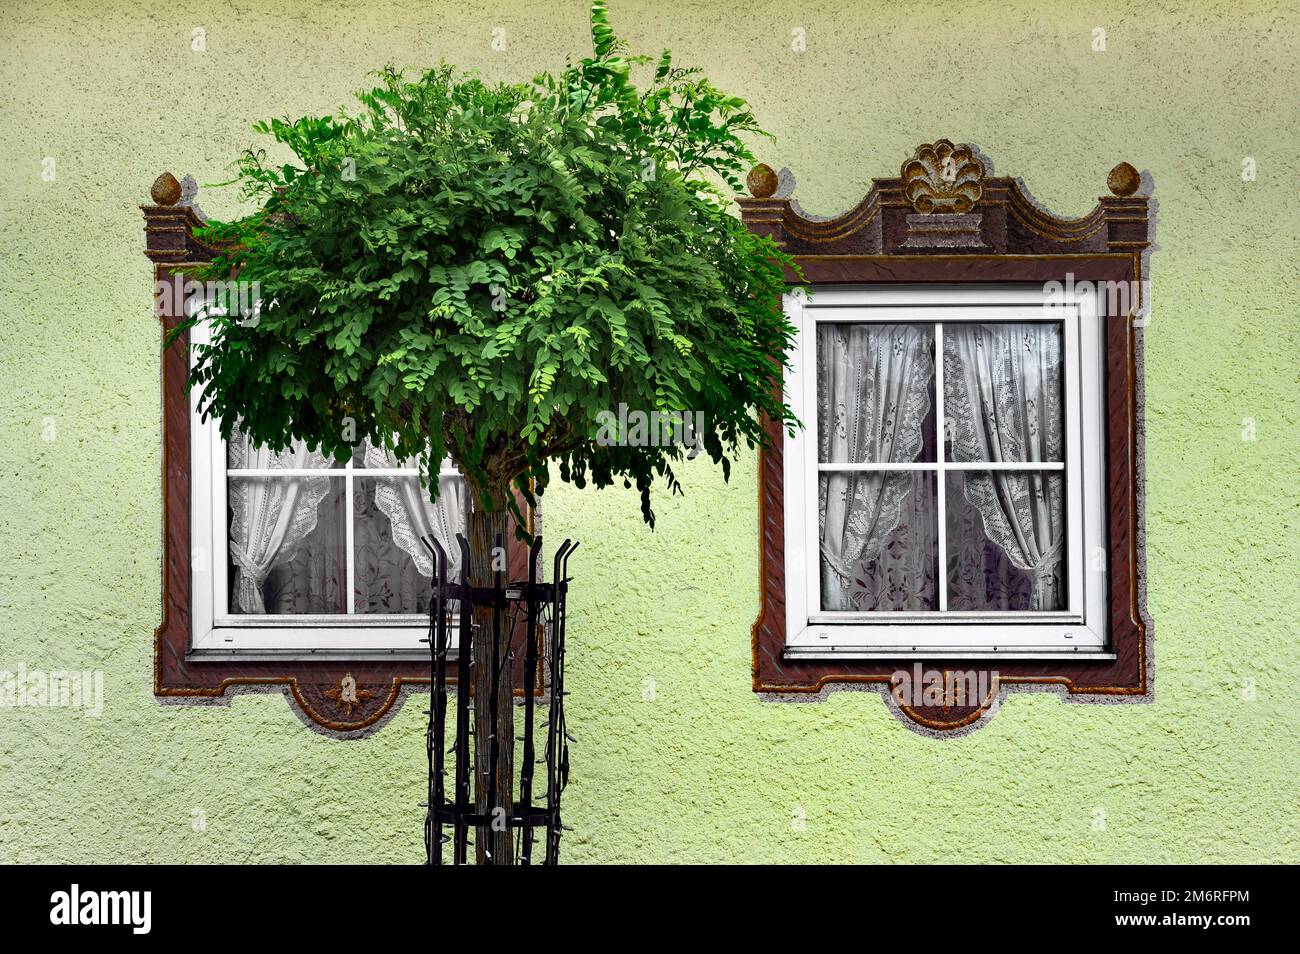 Green house wall and window with curtains and painted frames, Hindelang, Allgaeu, Bavaria, Germany Stock Photo